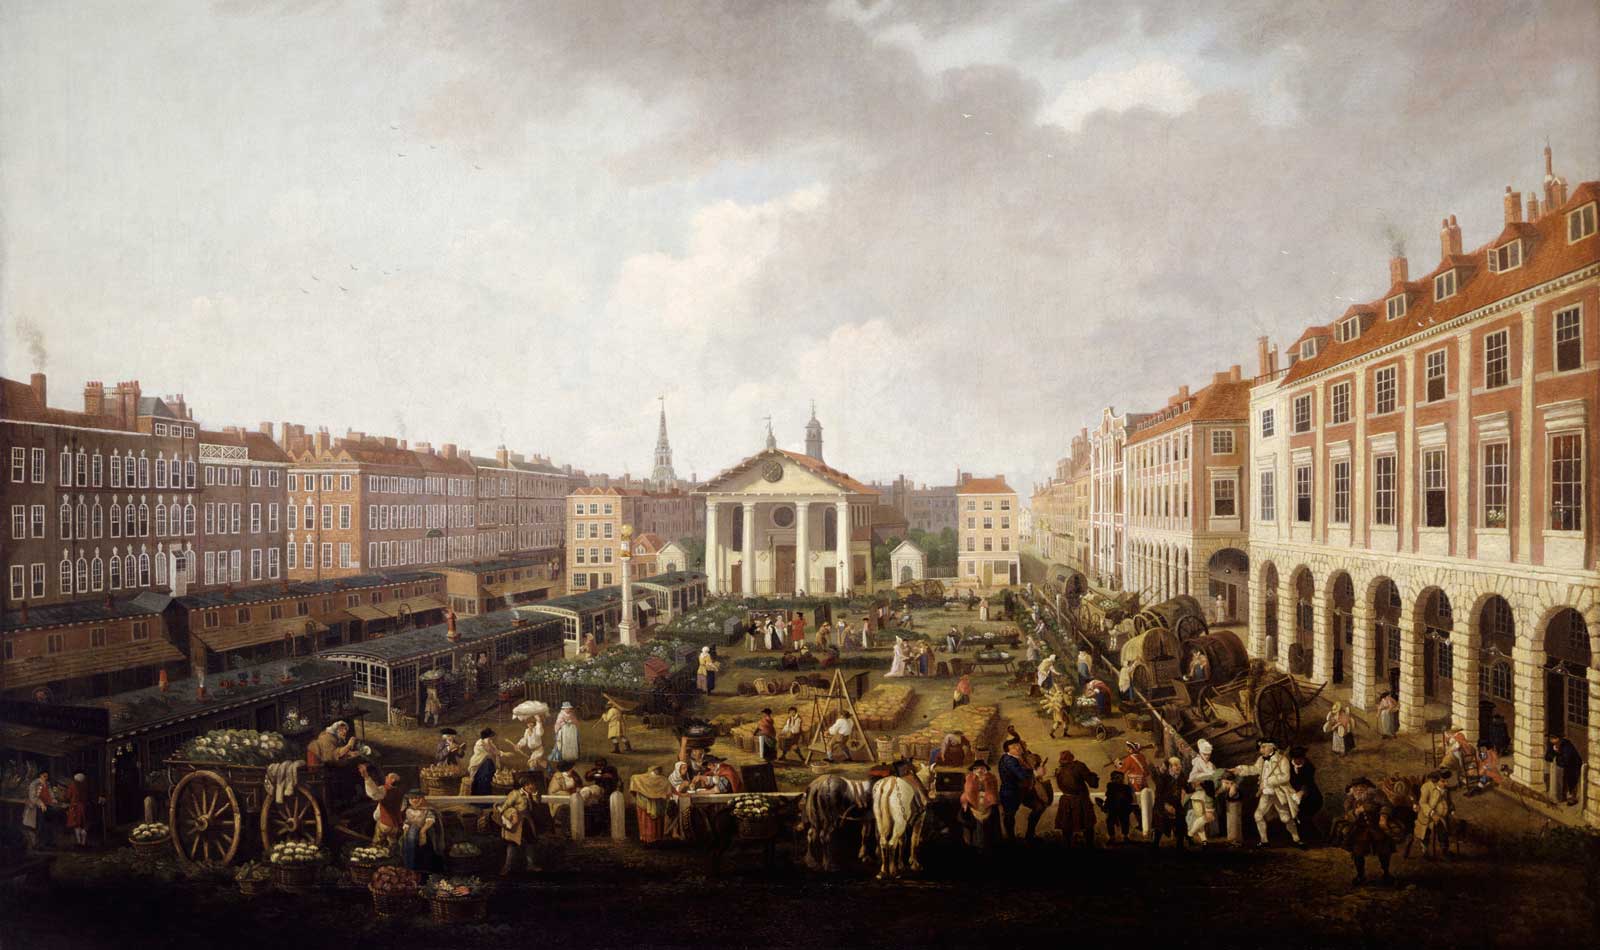 Covent Garden Piazza and Market. Oil on canvas. View from the east side looking towards St. Paul's church and Covent Garden. The scene shows a full range of sheds and two-storeyed market buildings. A number of carts are lined along the roadway on the north side. Sedan chairs can be seen under the 'piazzas'. The figures in this scene include street musicians, pick-pockets and a chair mender. The Spire of St. Martin-in-the-Field can be seen in the distance.
